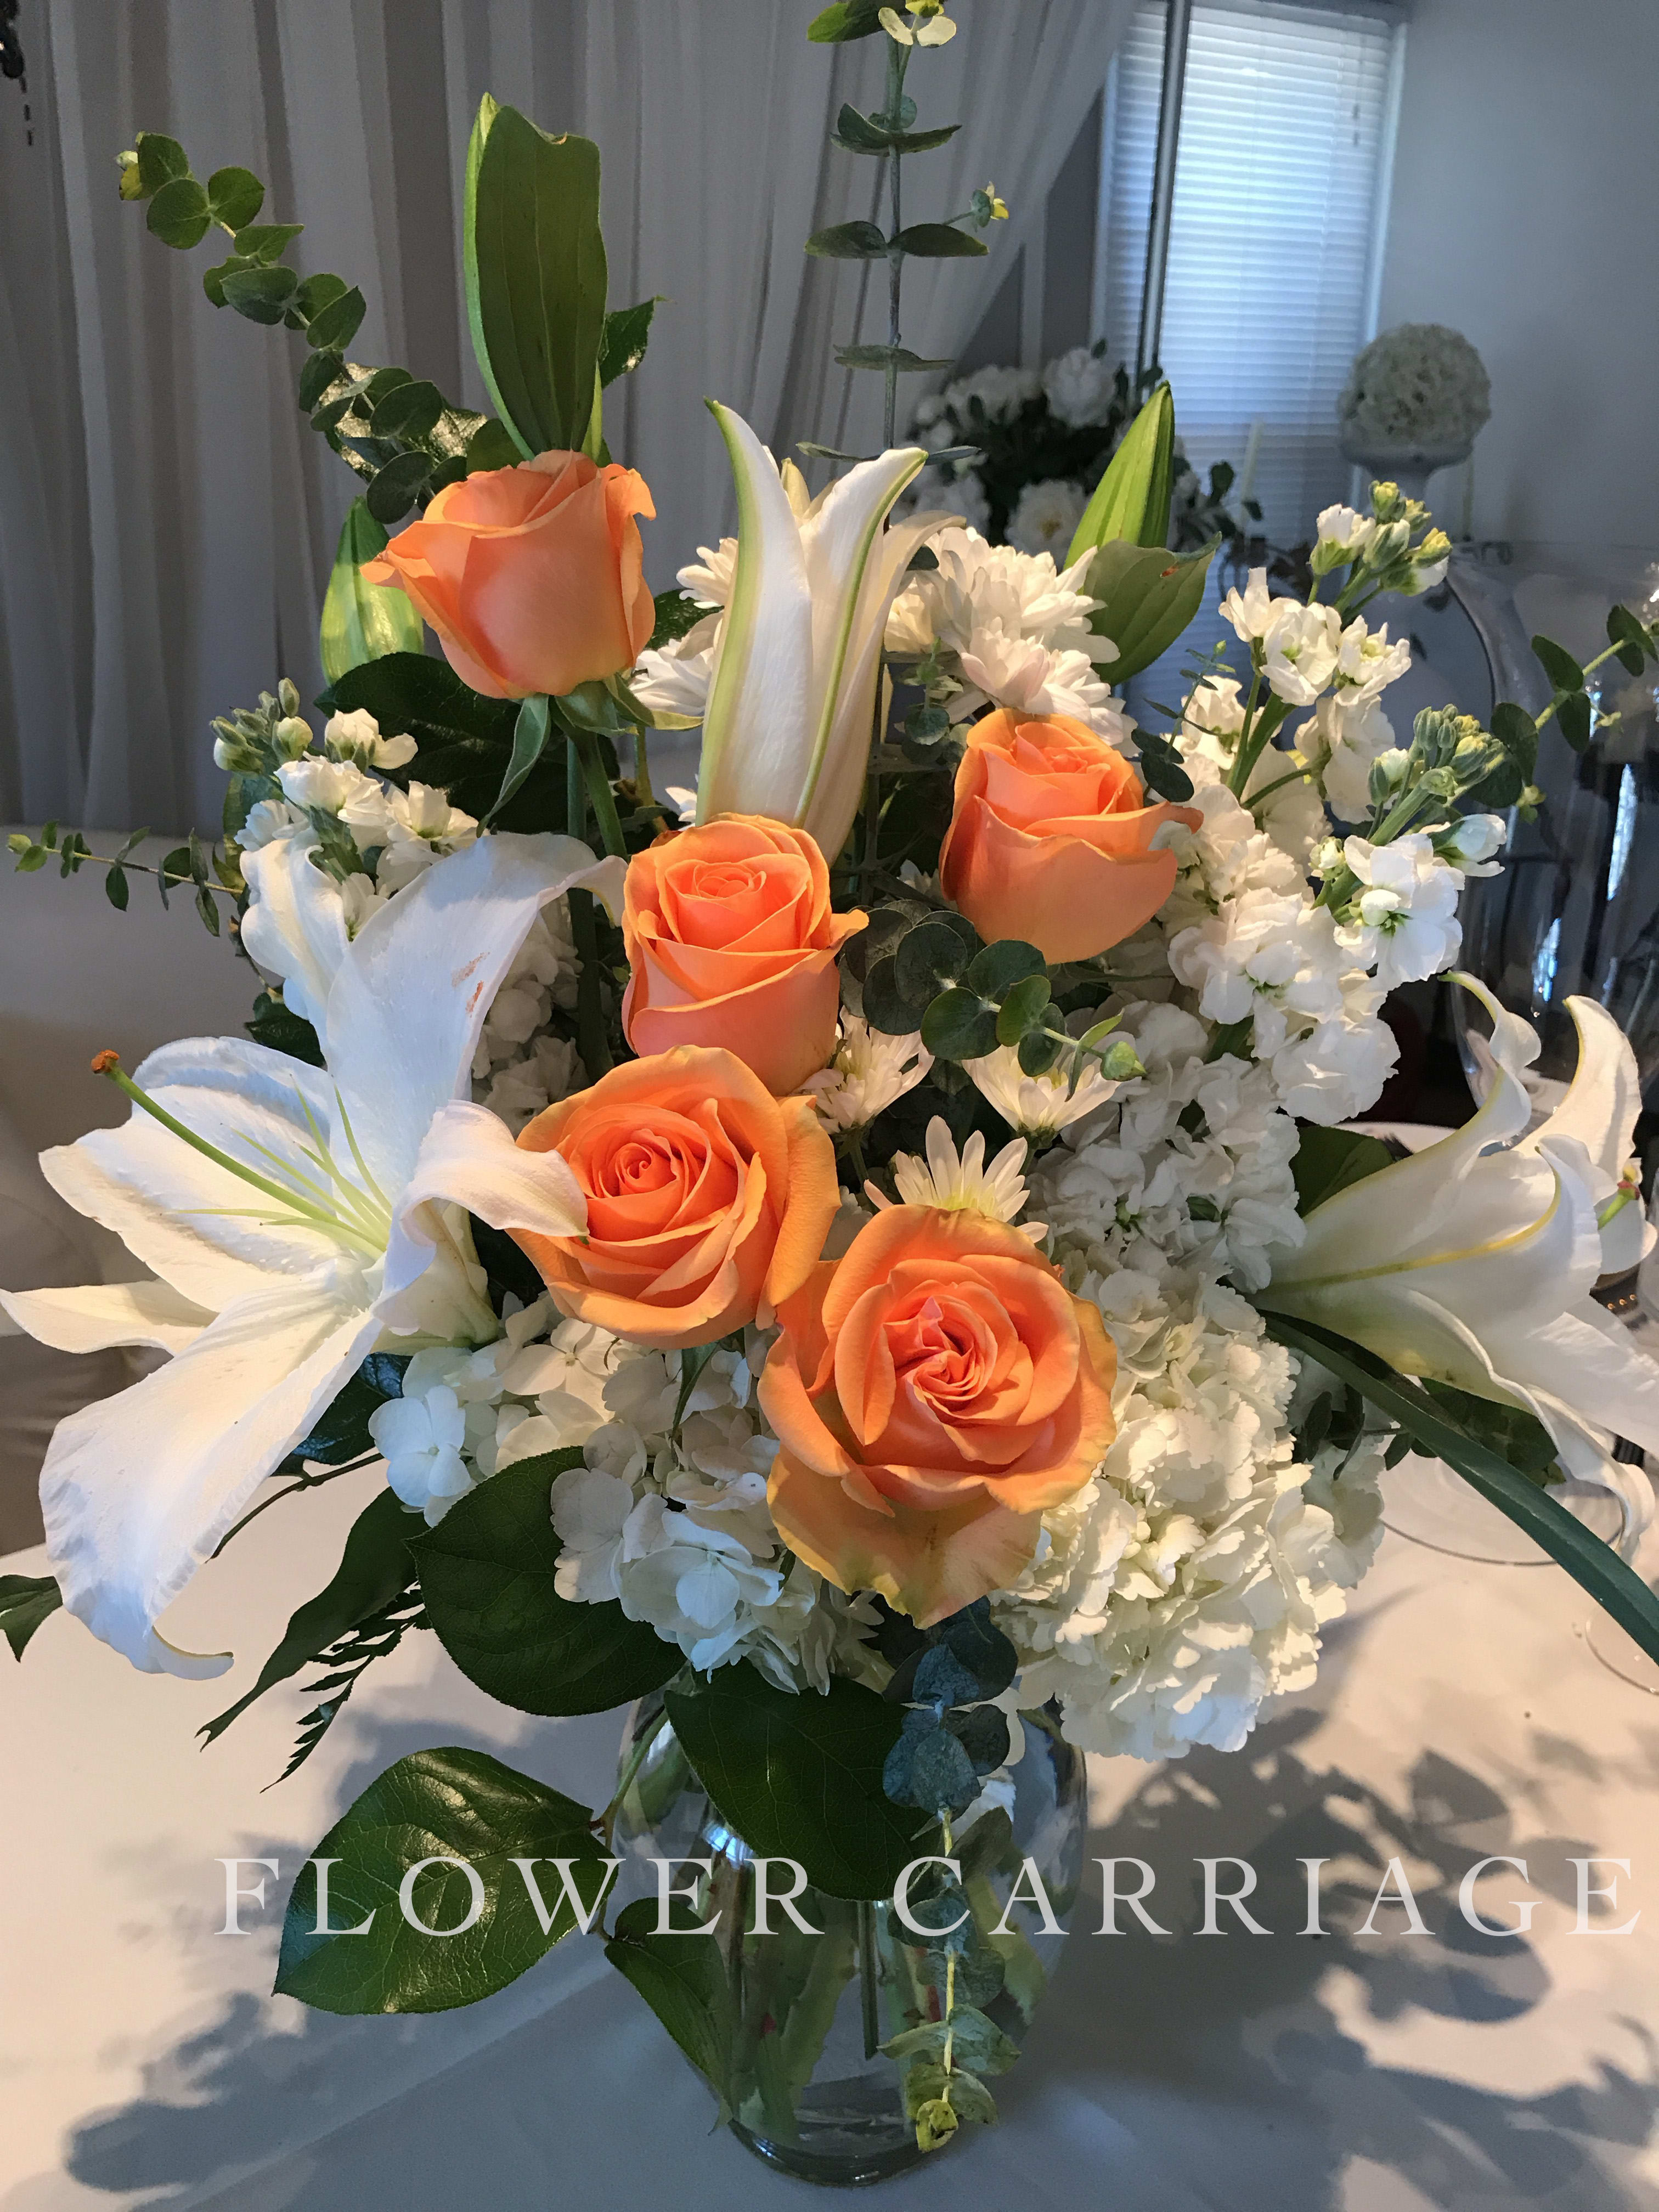 Peacefully Peach By Flower Carriage - Deliver a white bouquet with a splash of peach color to bright up the day. This arrangement features: roses, lilies, stock, hydrangea, chrysanthemums, and eucalyptus.   